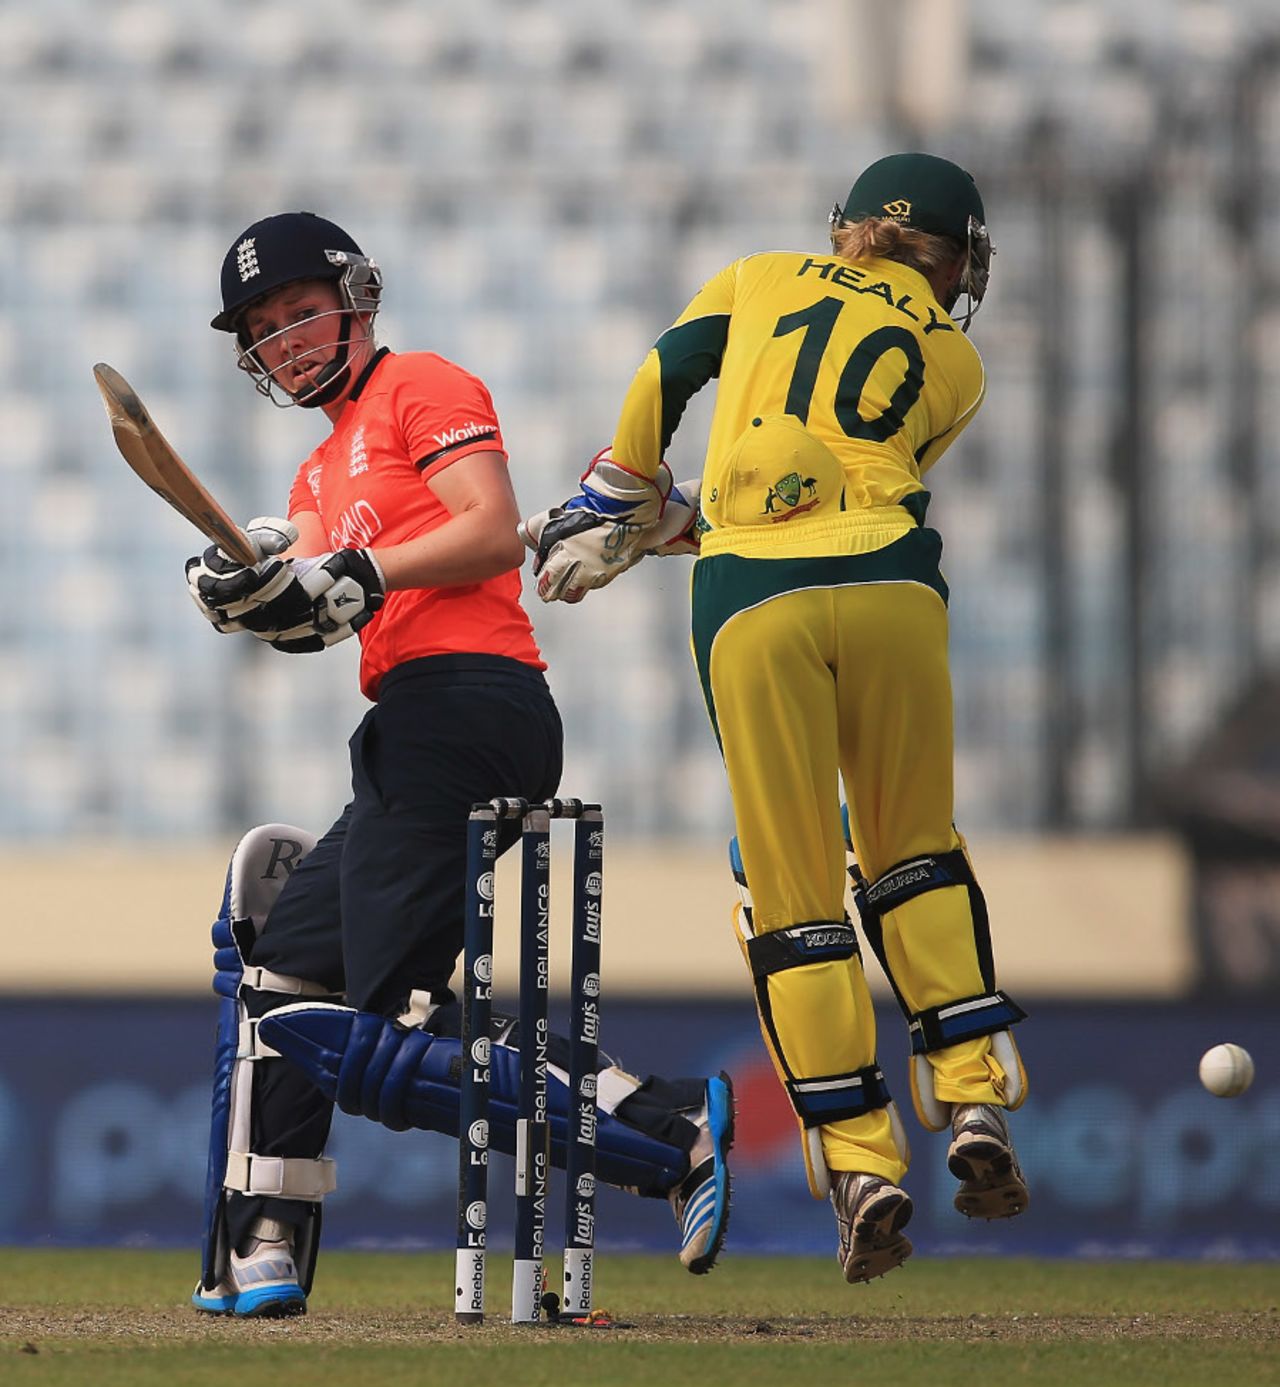 Heather Knight scoops the ball past the keeper, Australia v England, Women's World T20, final, April 6, 2014